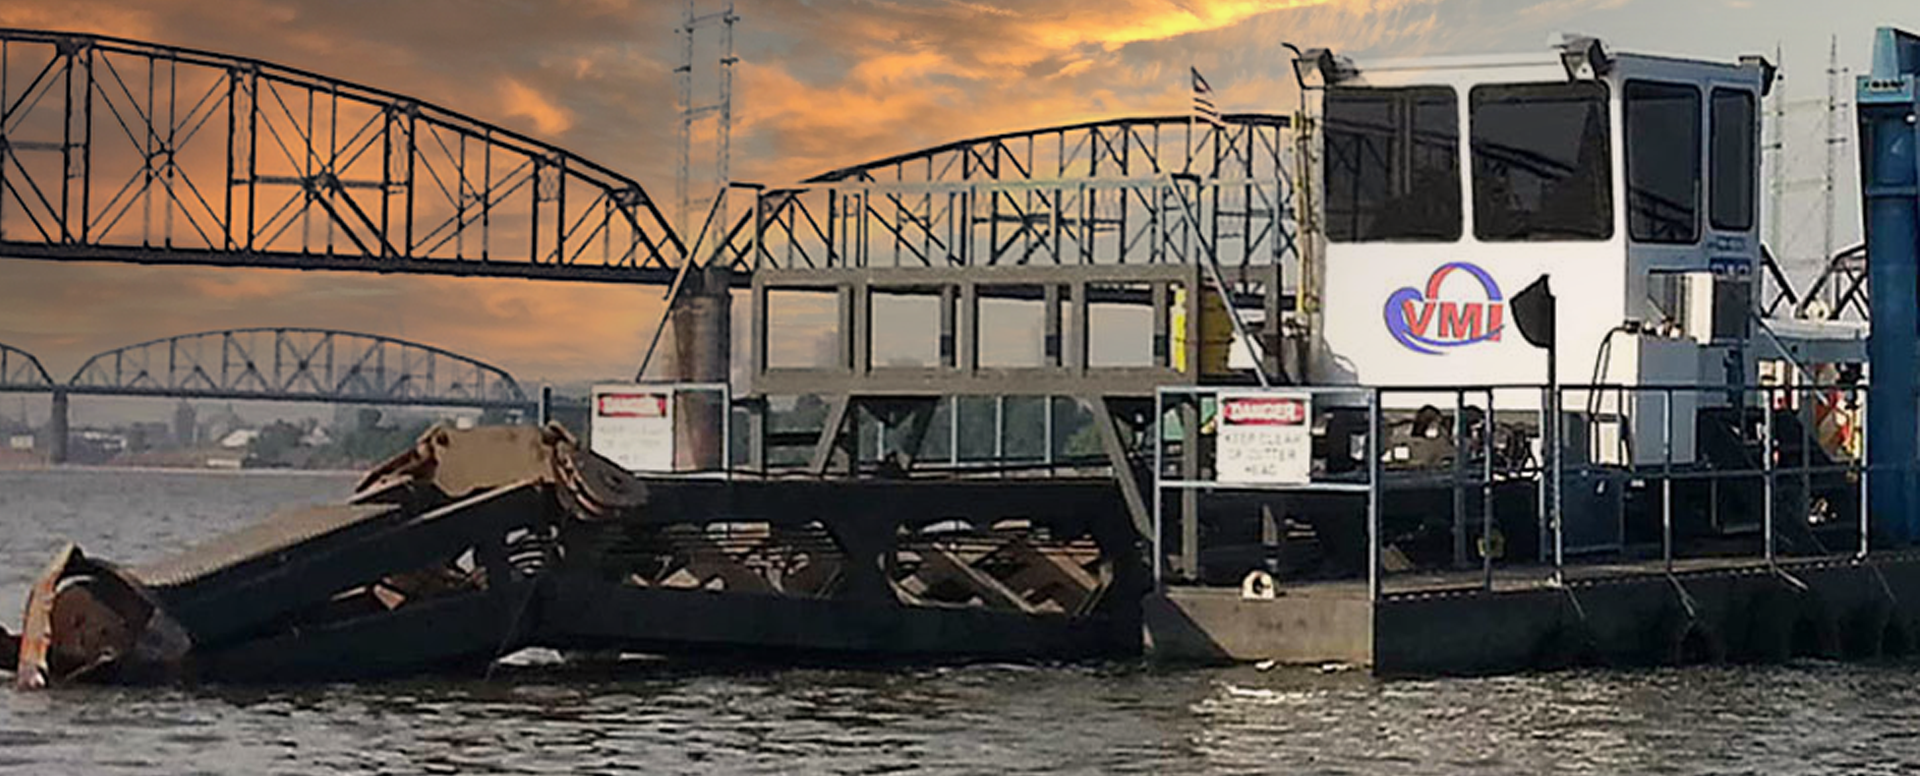 A VMI Gladiator 1230 portable cutter suction dredge at work in St. Louis, Missouri.